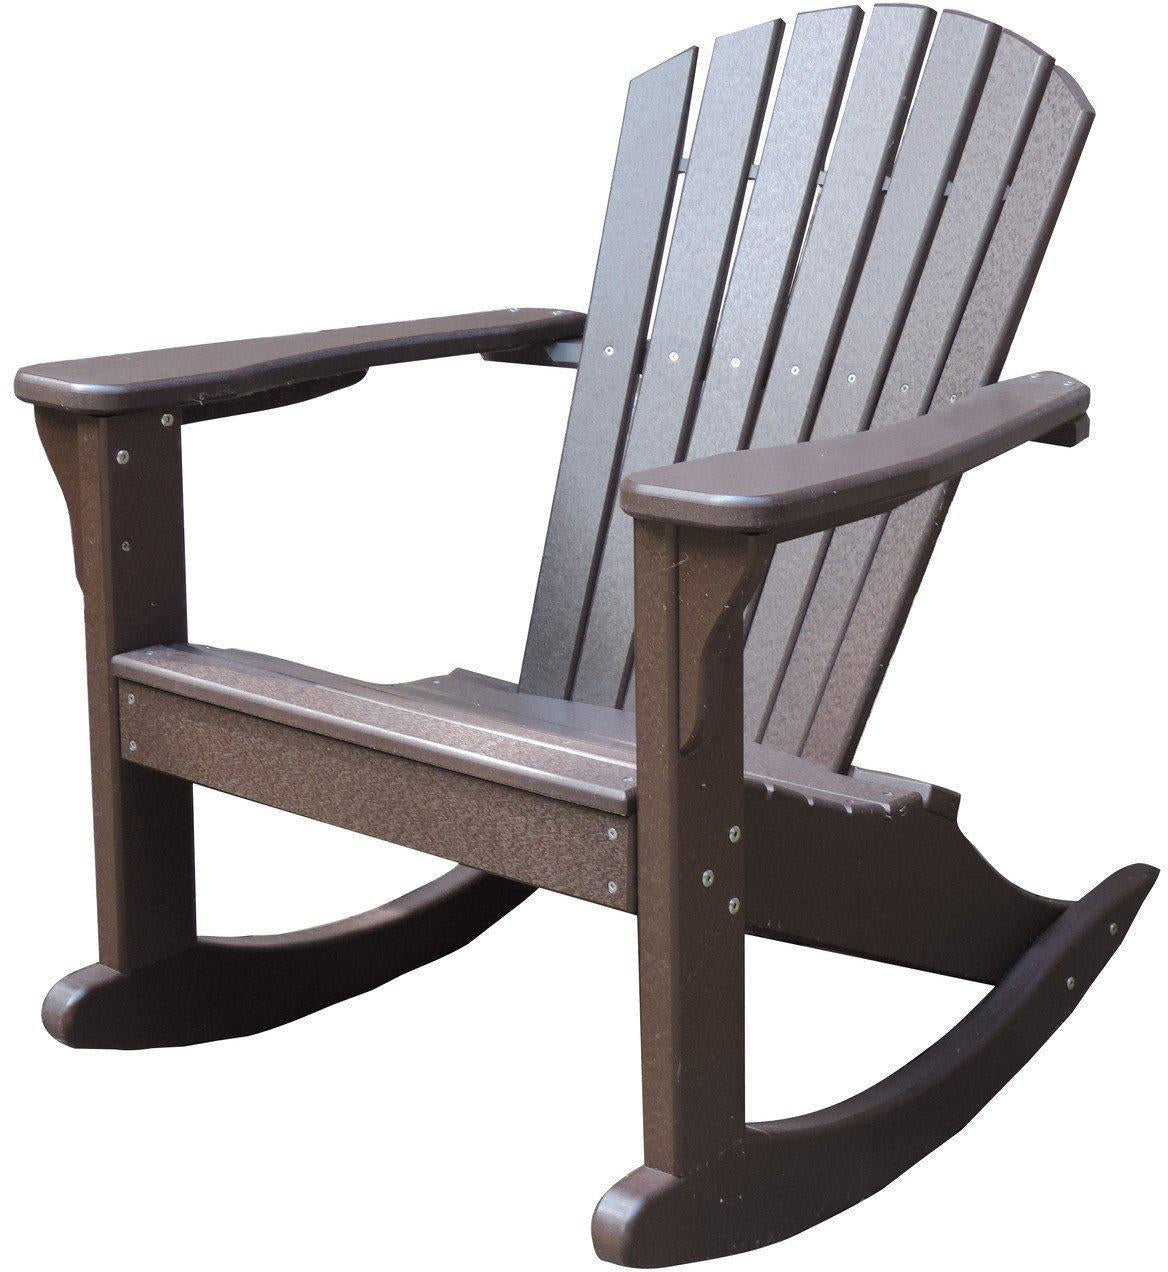 Perfect Choice Outdoor Furniture Recycled Plastic Rocking Chair - Rocking Furniture